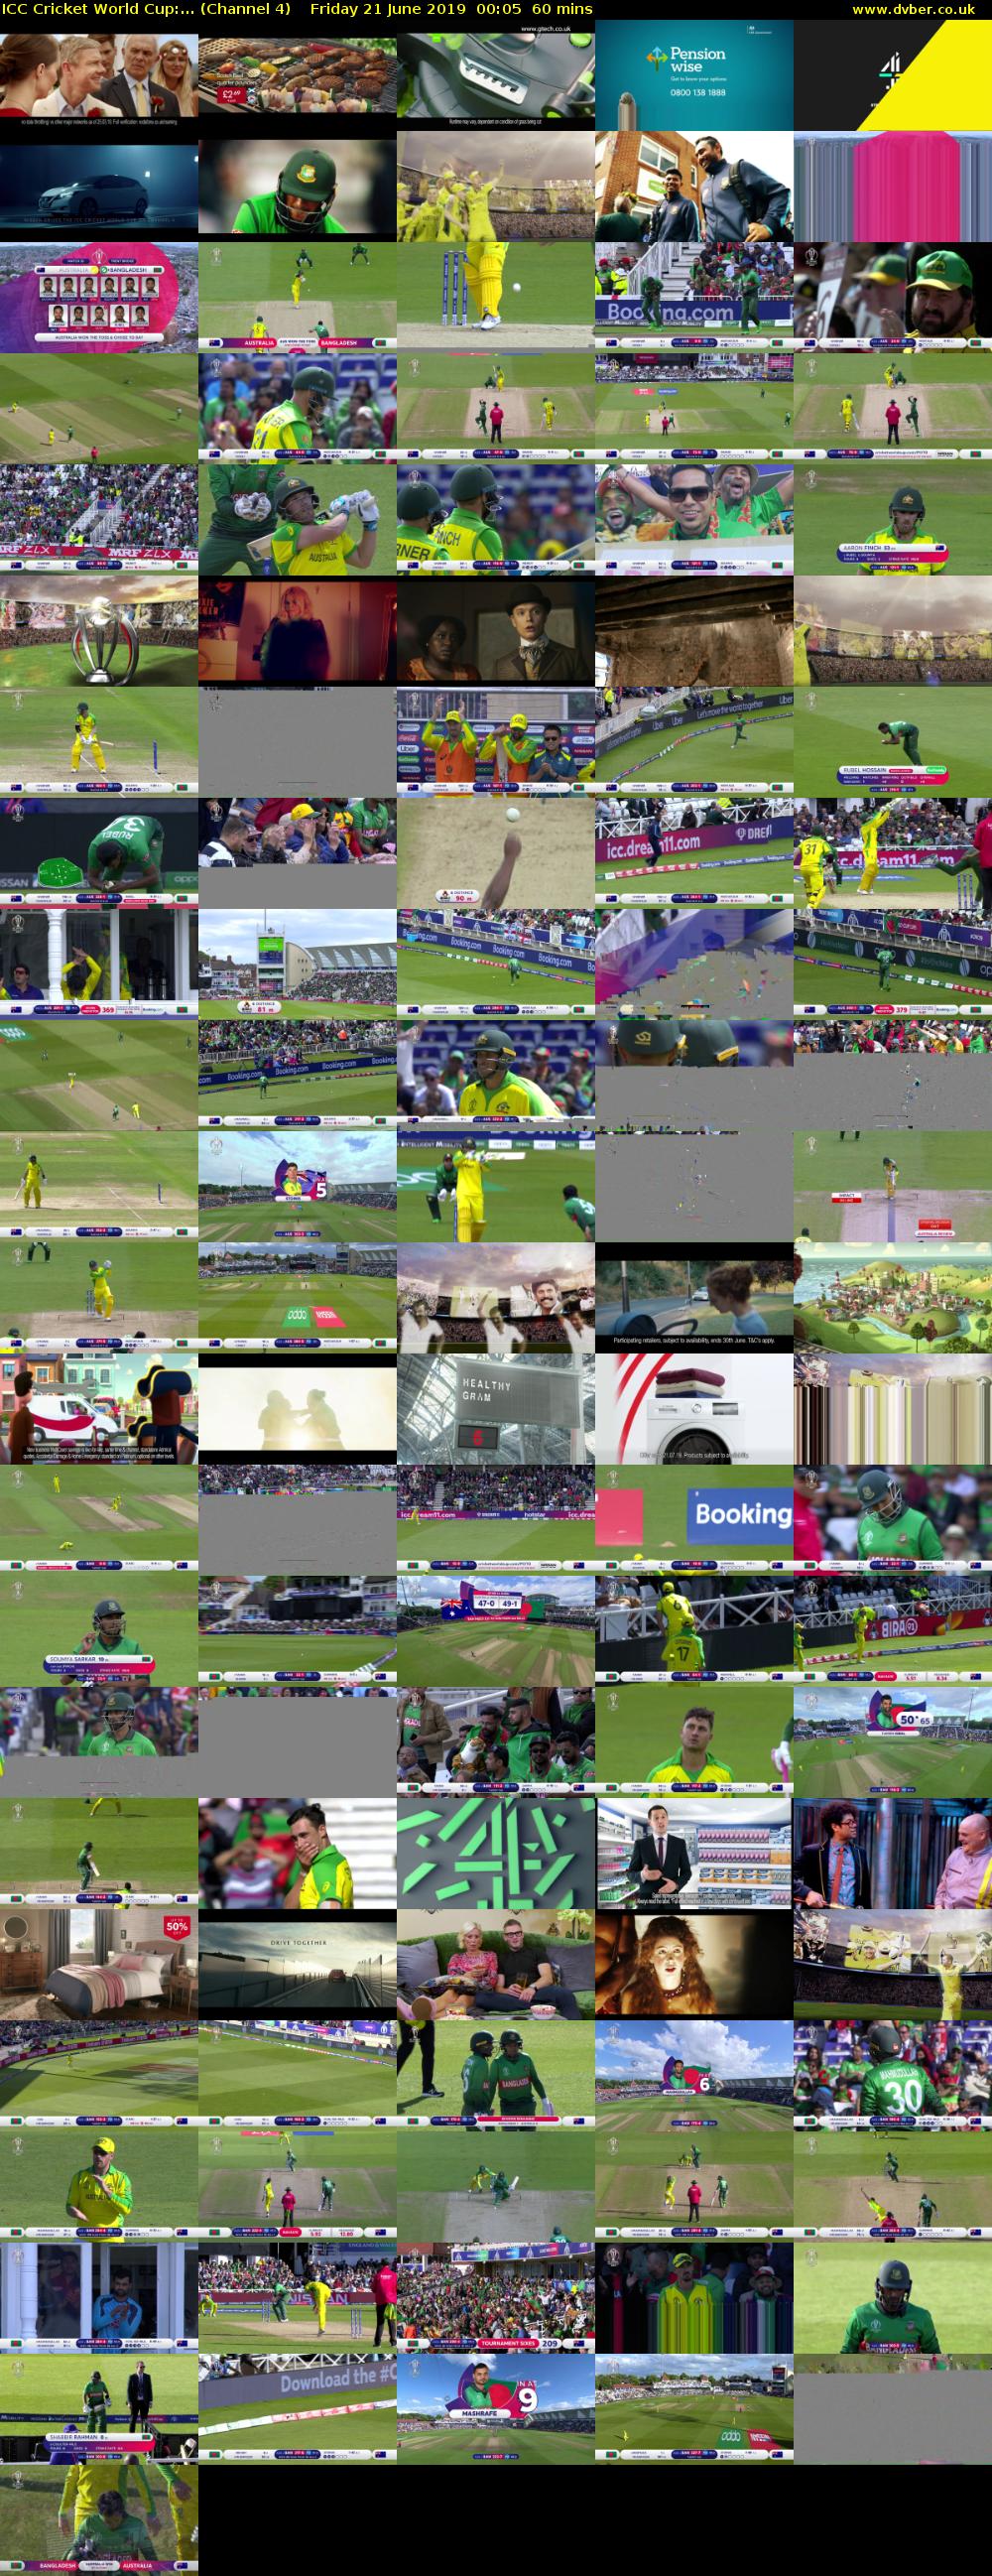 ICC Cricket World Cup:... (Channel 4) Friday 21 June 2019 00:05 - 01:05